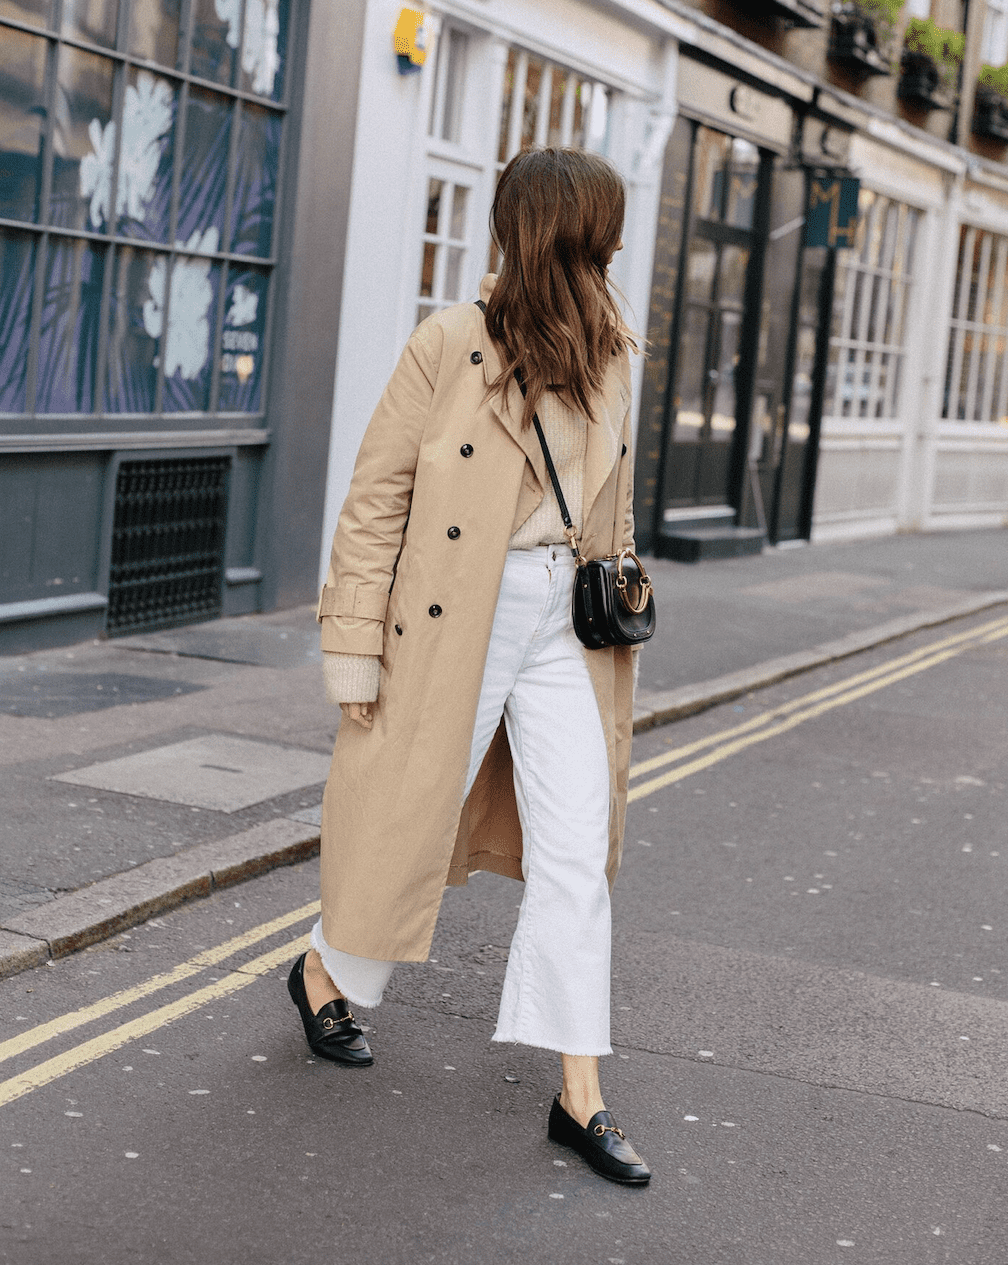 Woman wearing white jeans, black loafers, a cream sweater and a tan trench coat crosses the street.